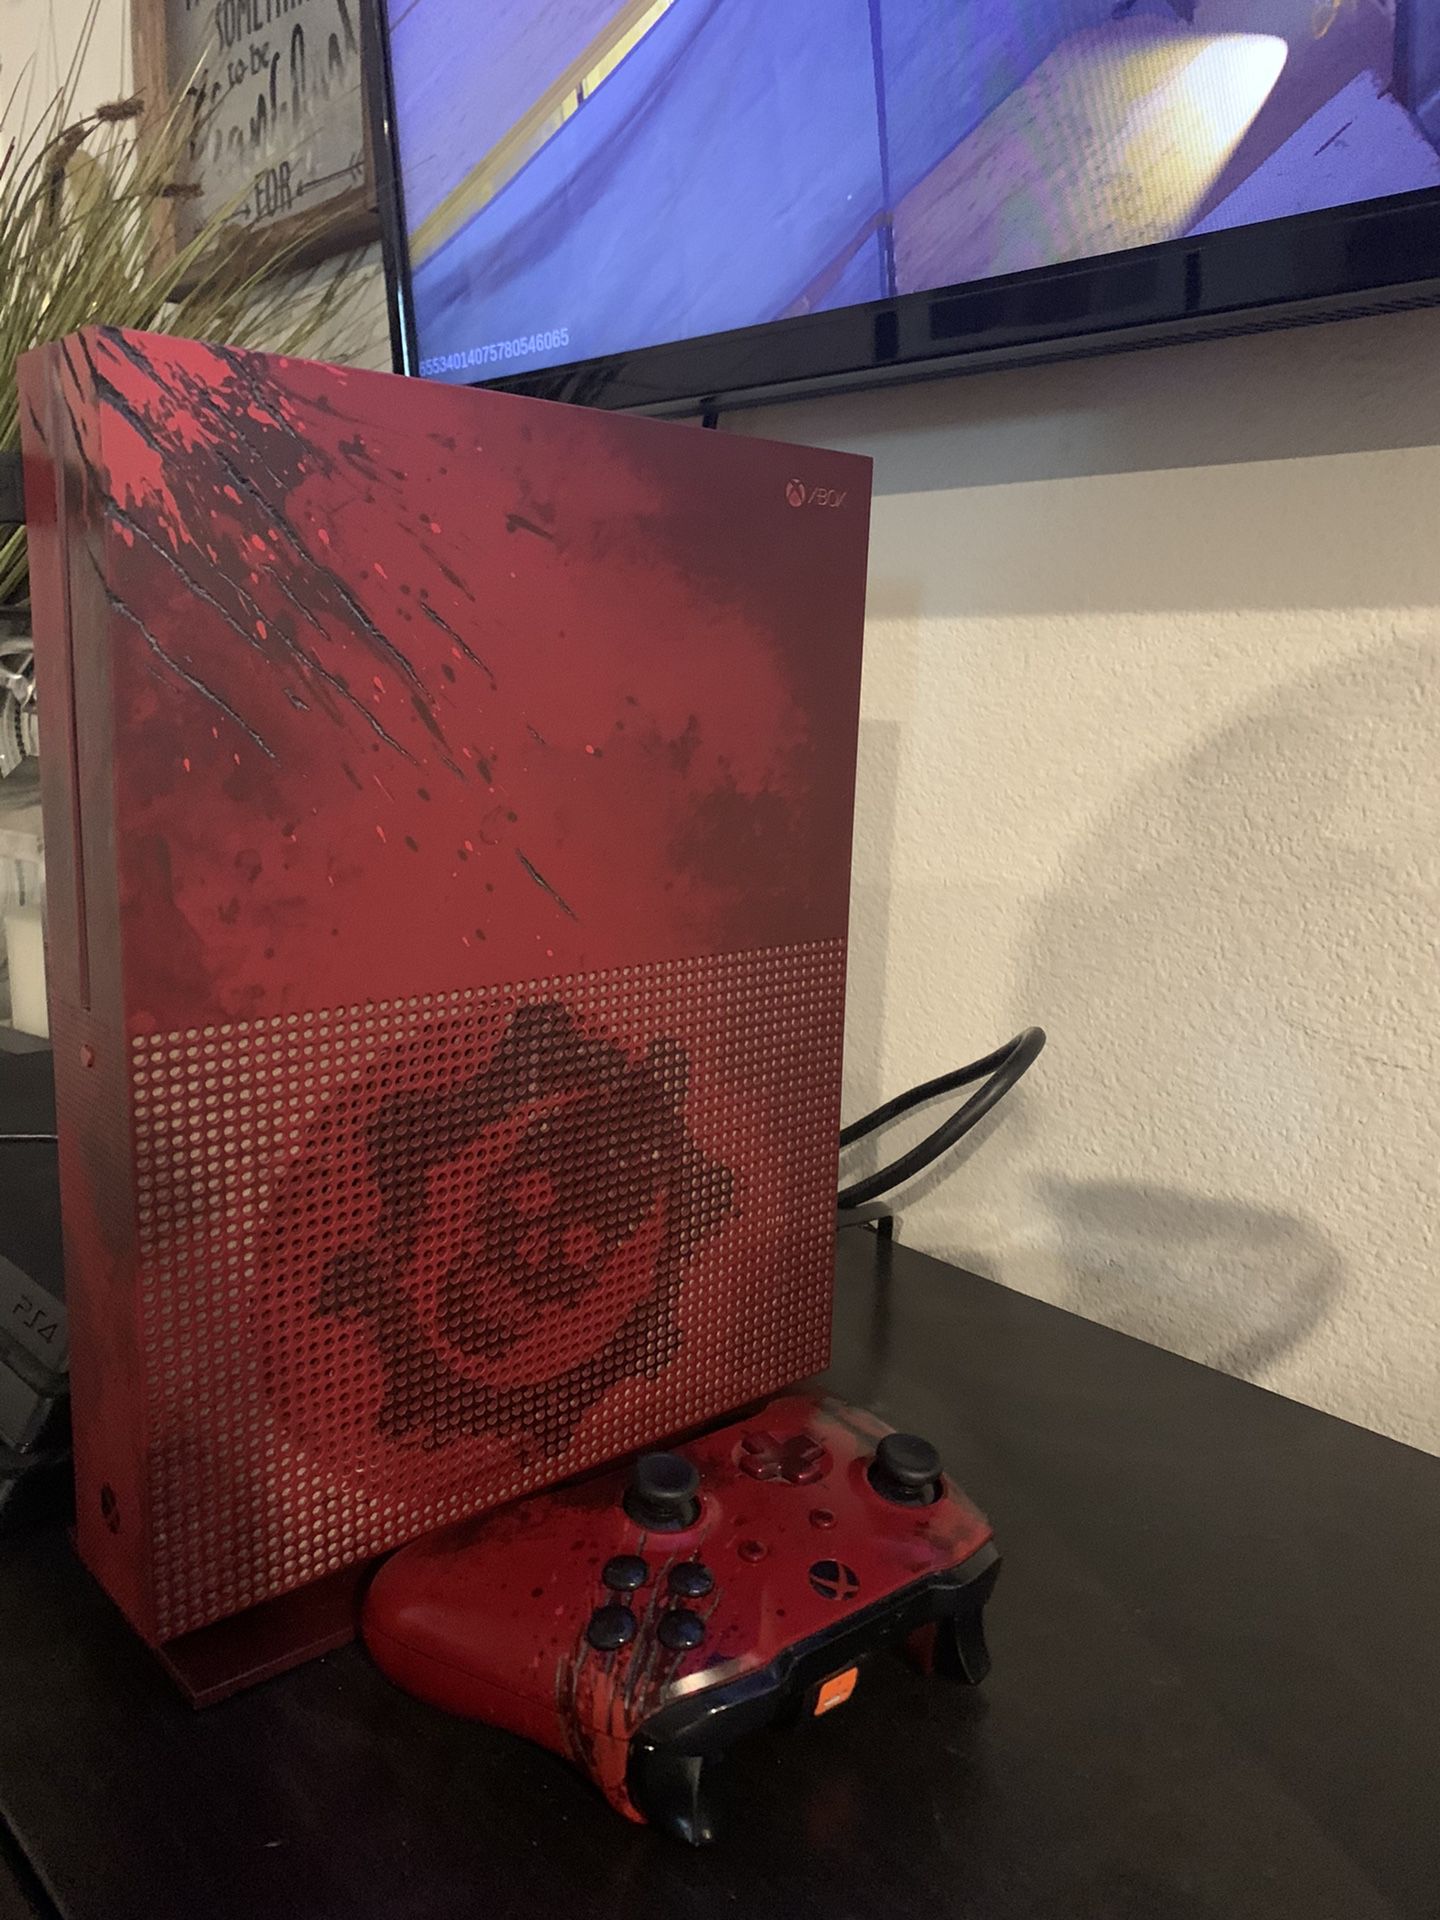 Limited Edition Gears of War 4 Xbox One s 2TB